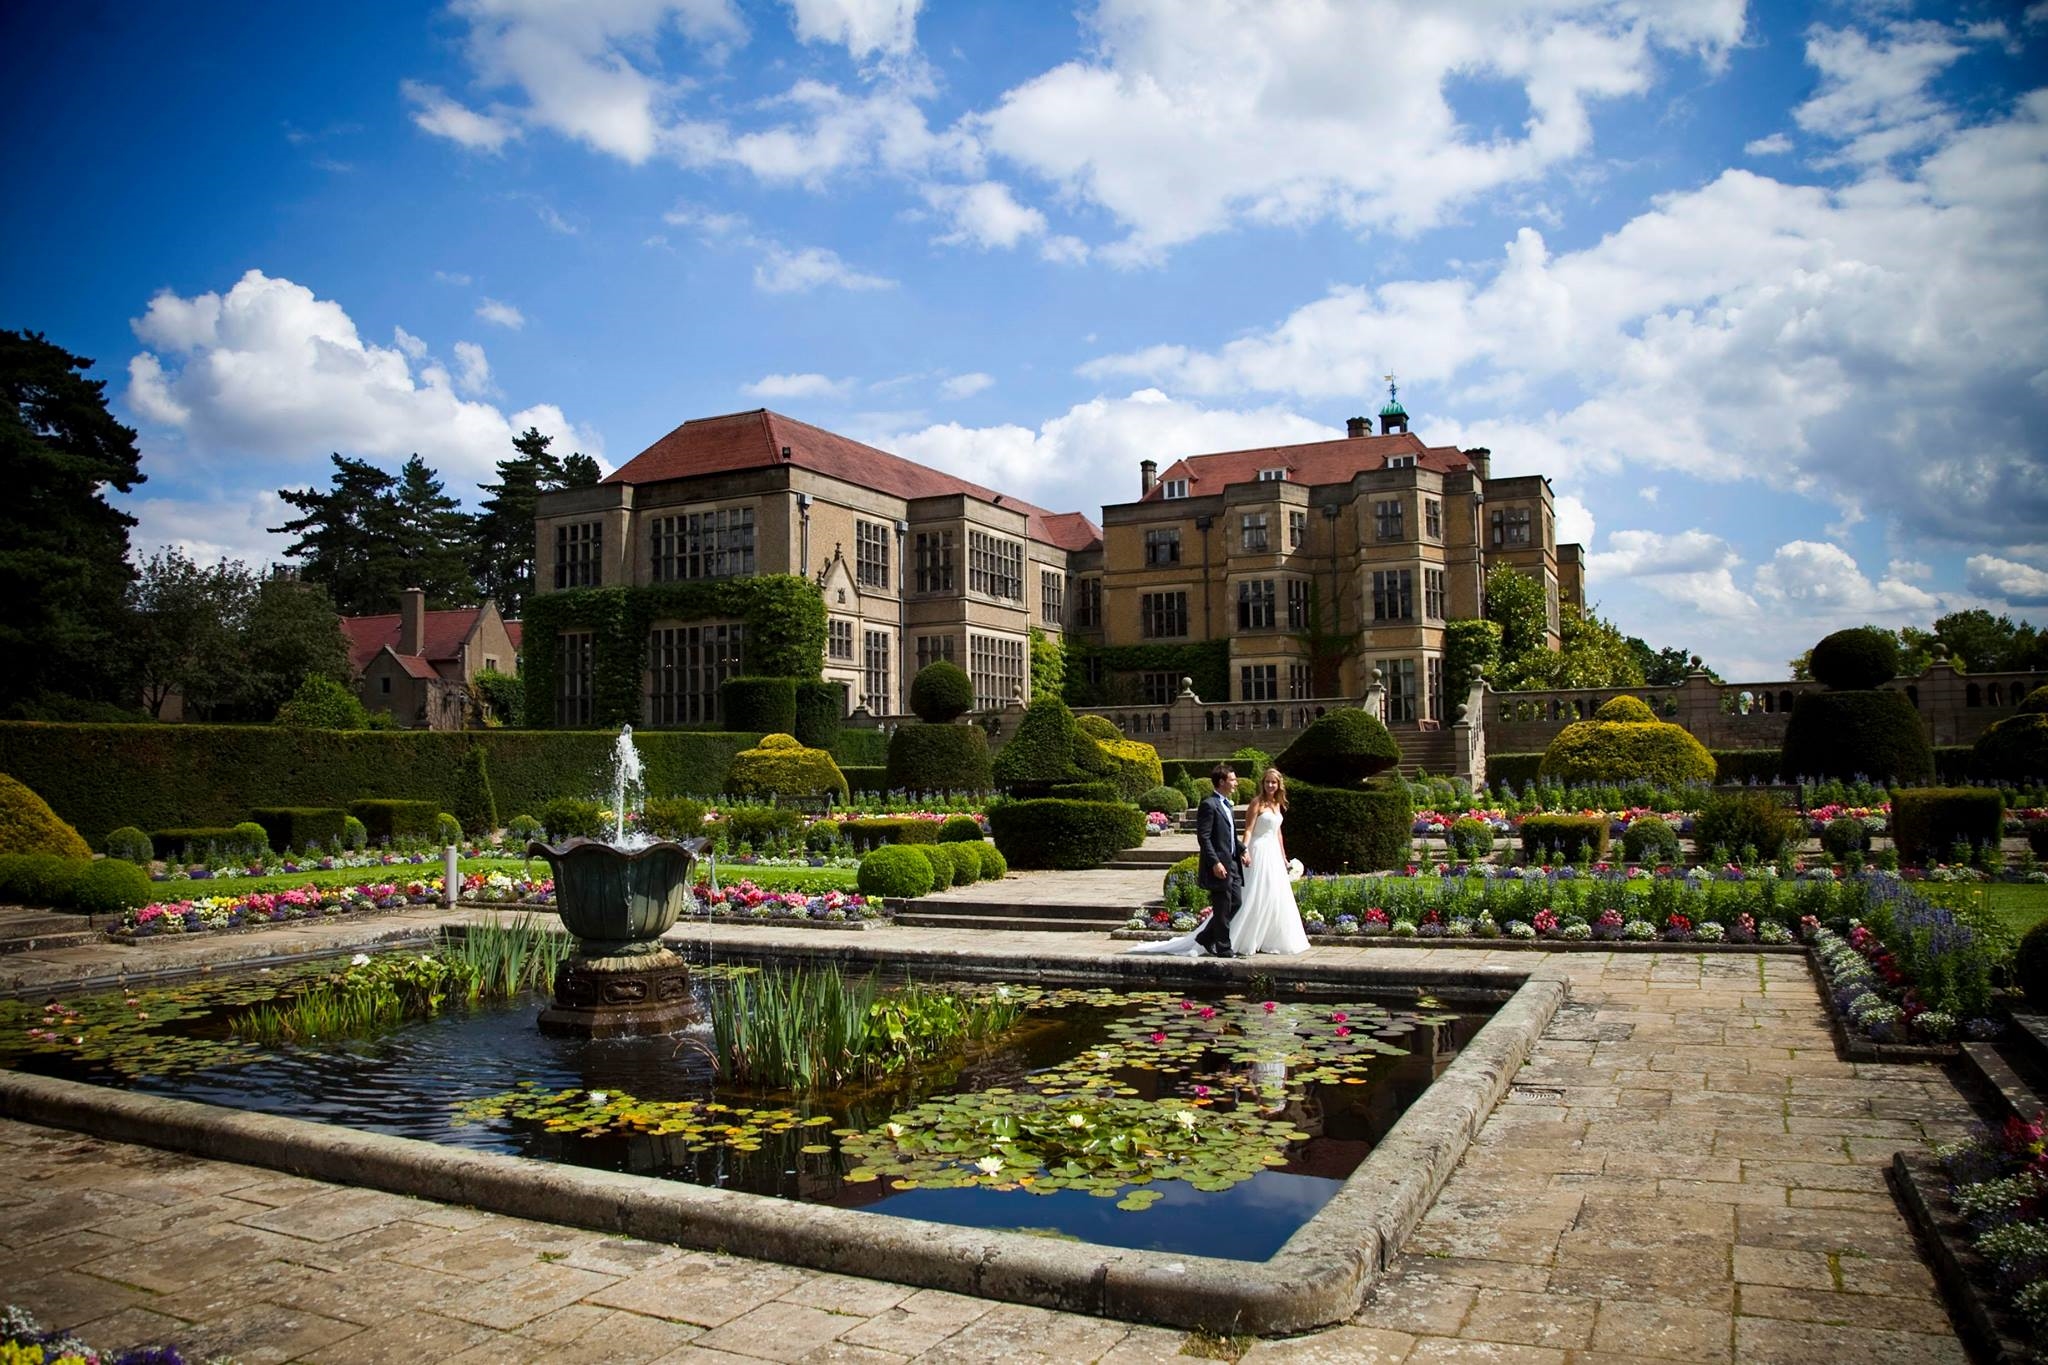 Things You Should Know About The Wedding Venue Herts